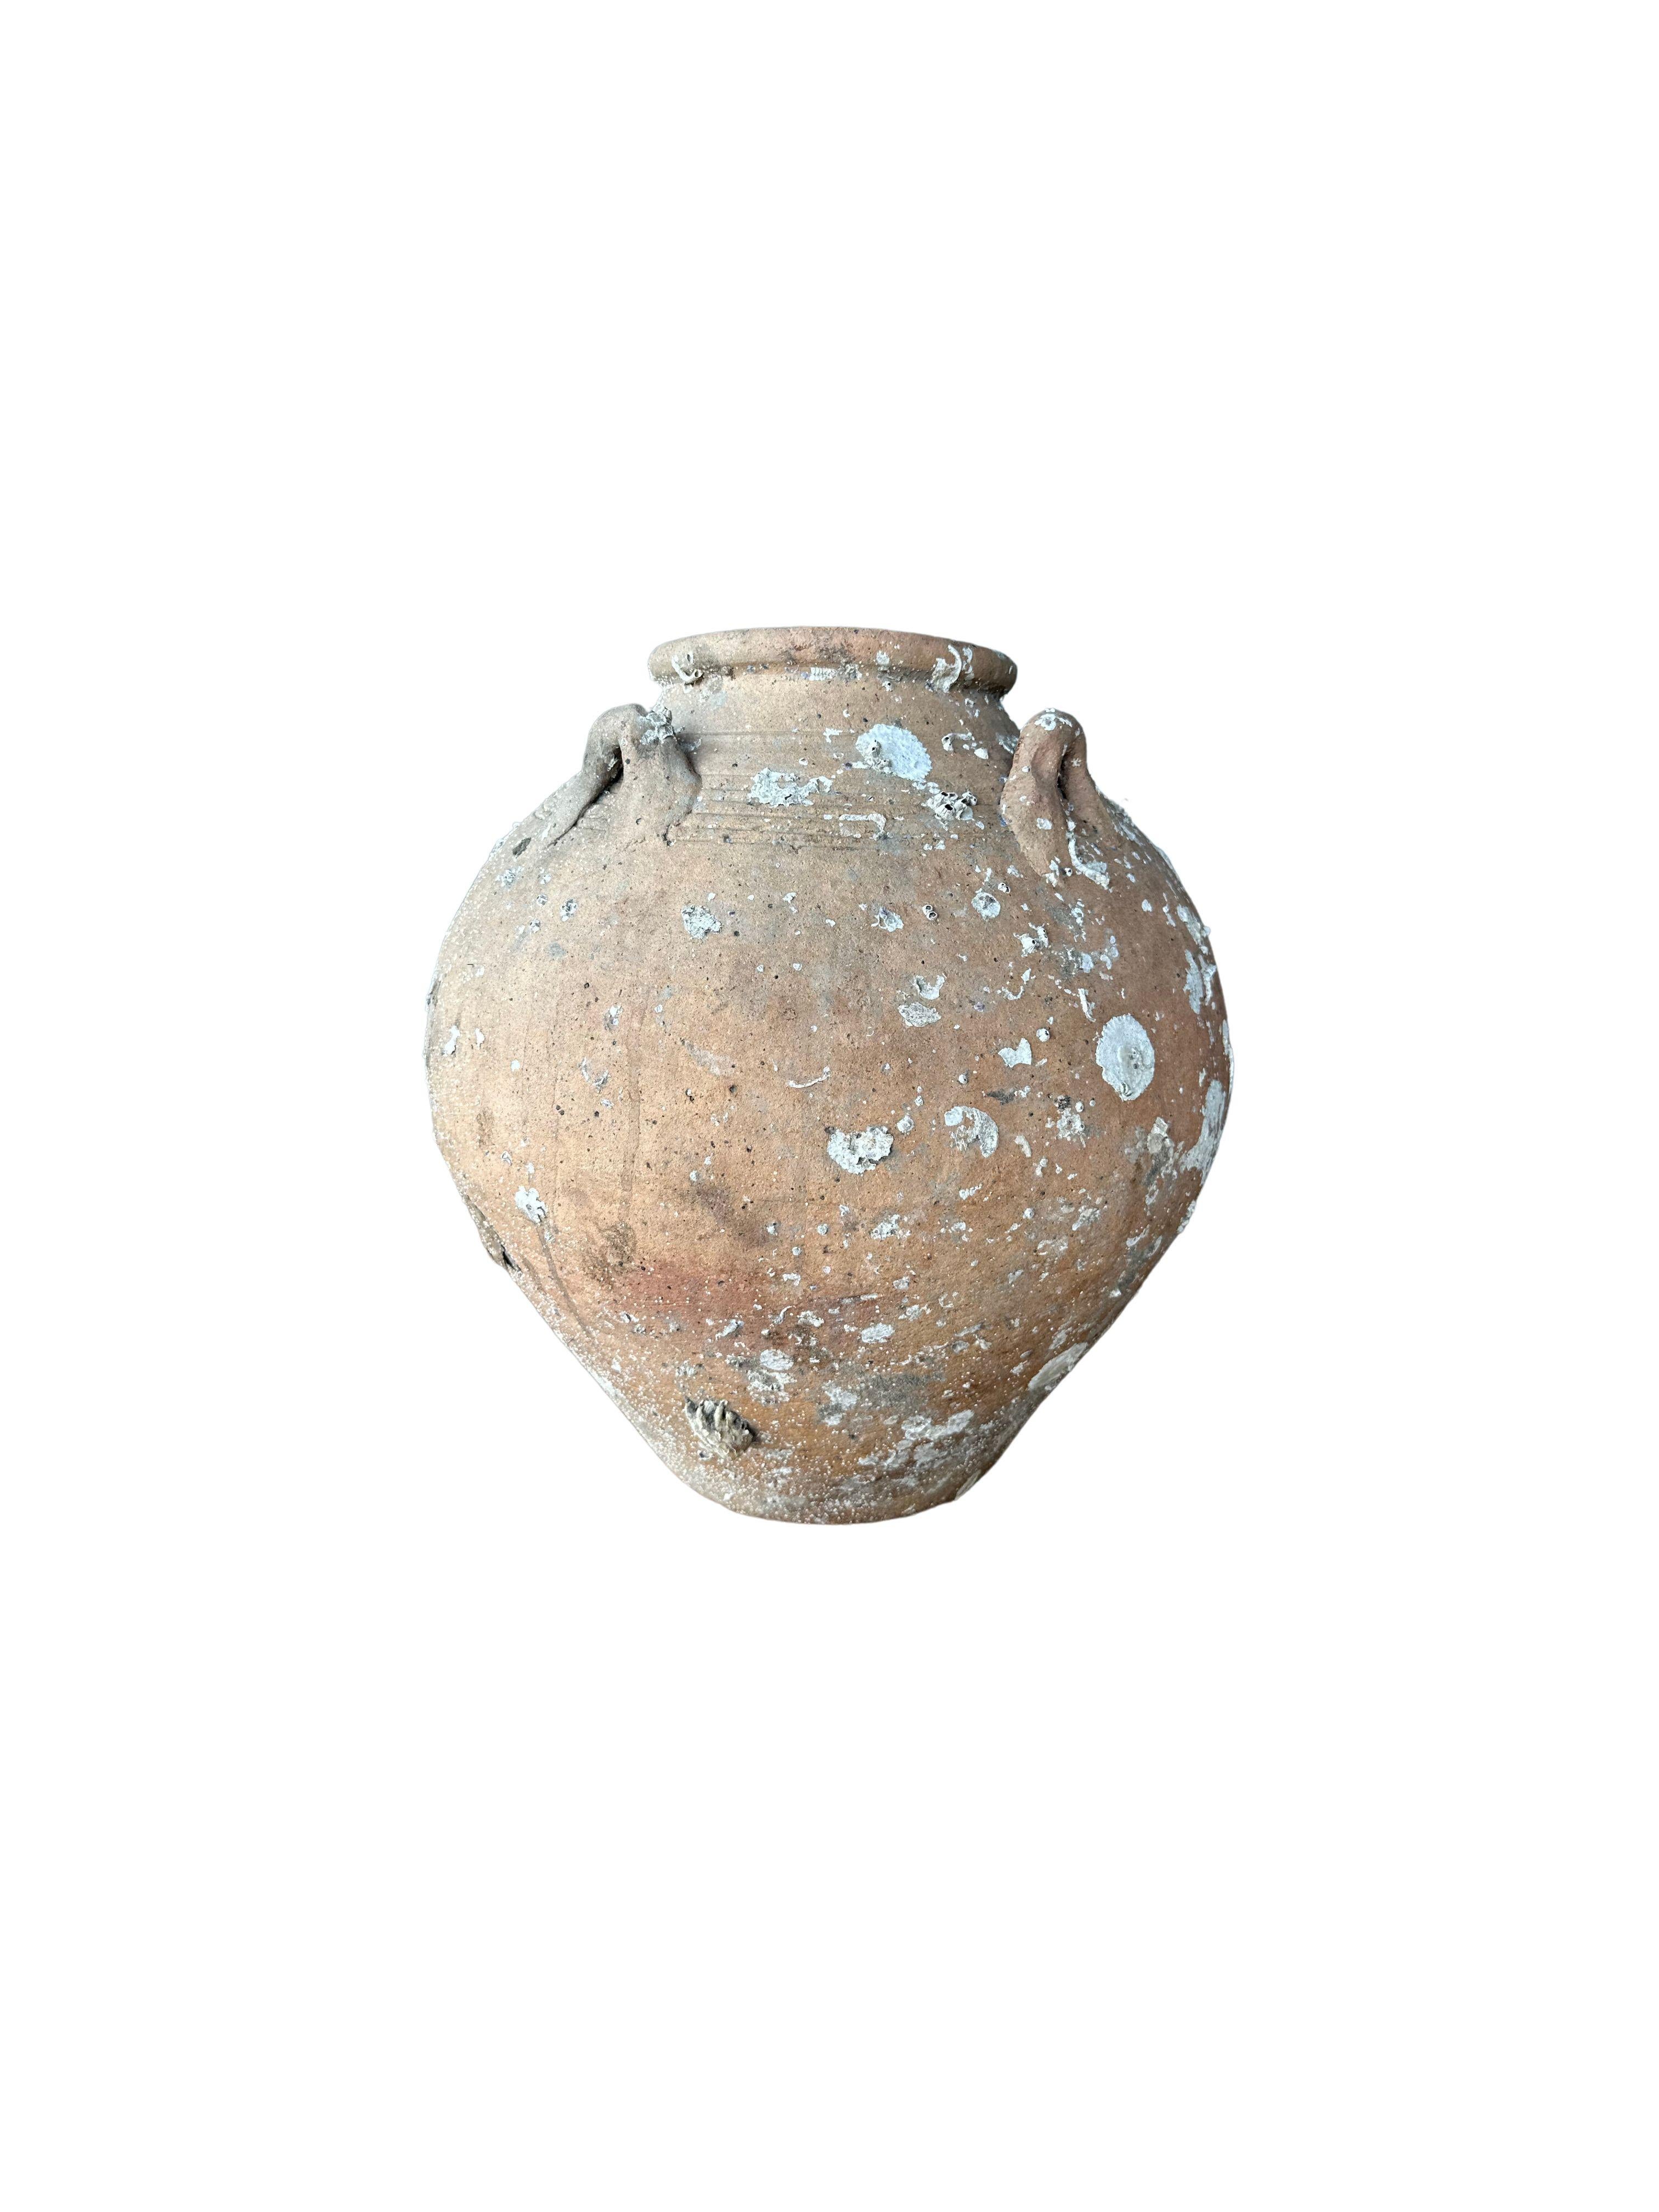 Other Singburi Shipwreck Jar from the Kingdom of Sukhothai, Thailand, 17th Century For Sale